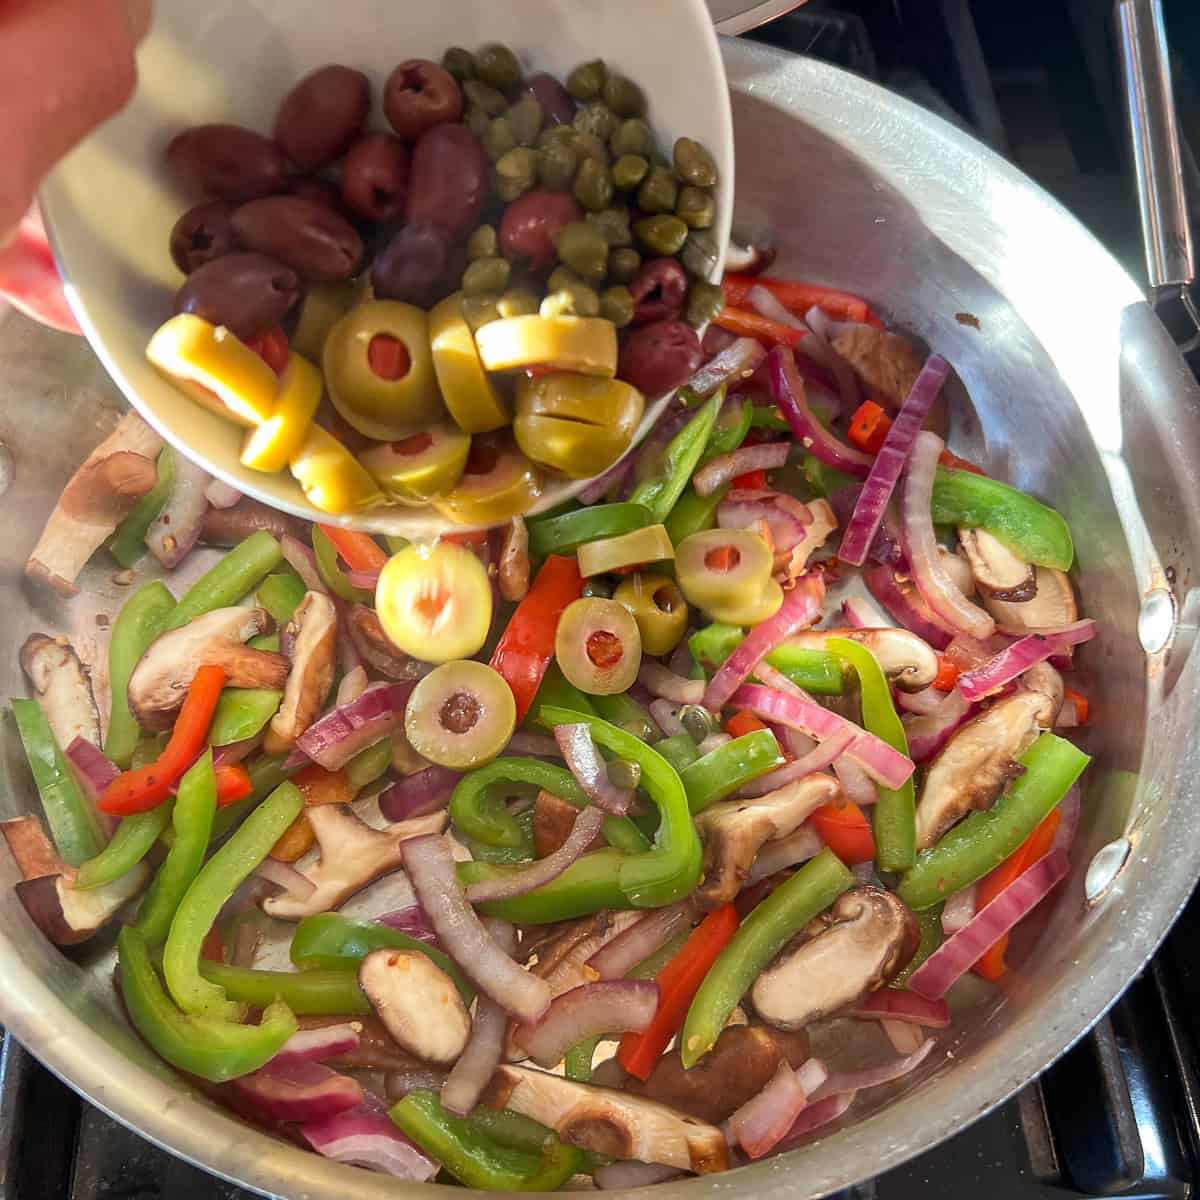 olives and capers being added to a saute pan with veggies on the stovetop